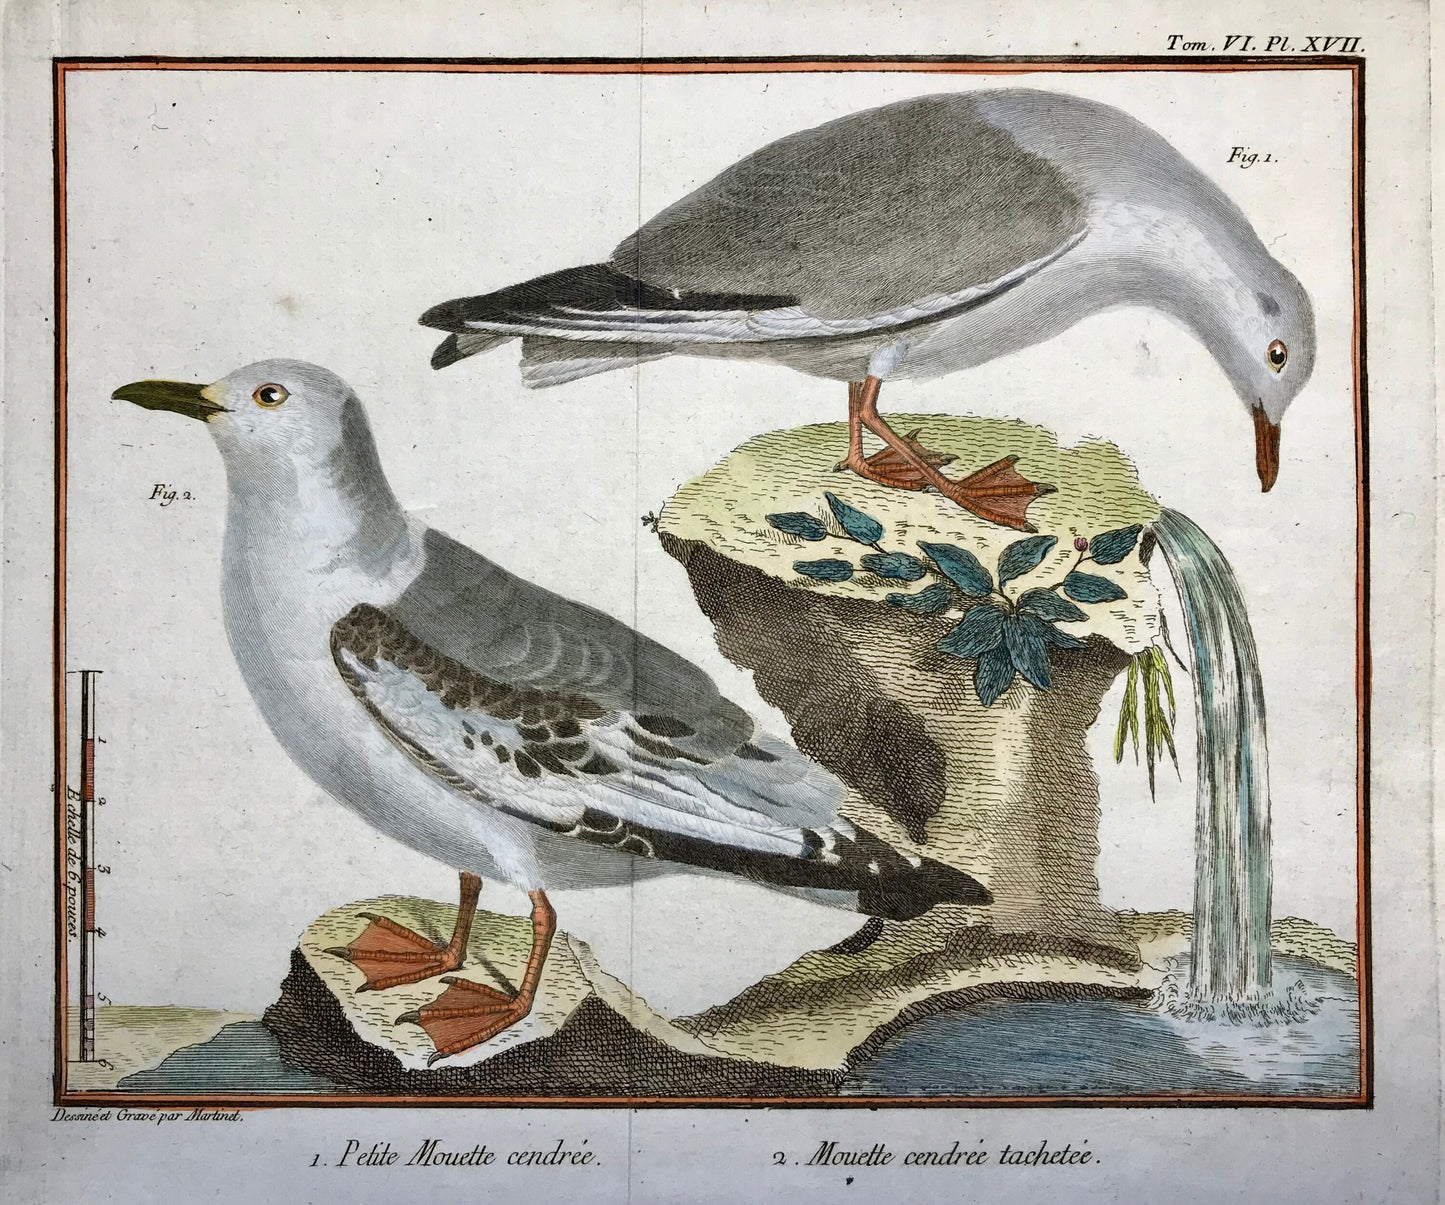 A Copper Plate Engraving of Two Types of Seagull. By Francois-Nicholas Martinet. Hand coloured. Dated 1770. 25 x 34.7 cms. .